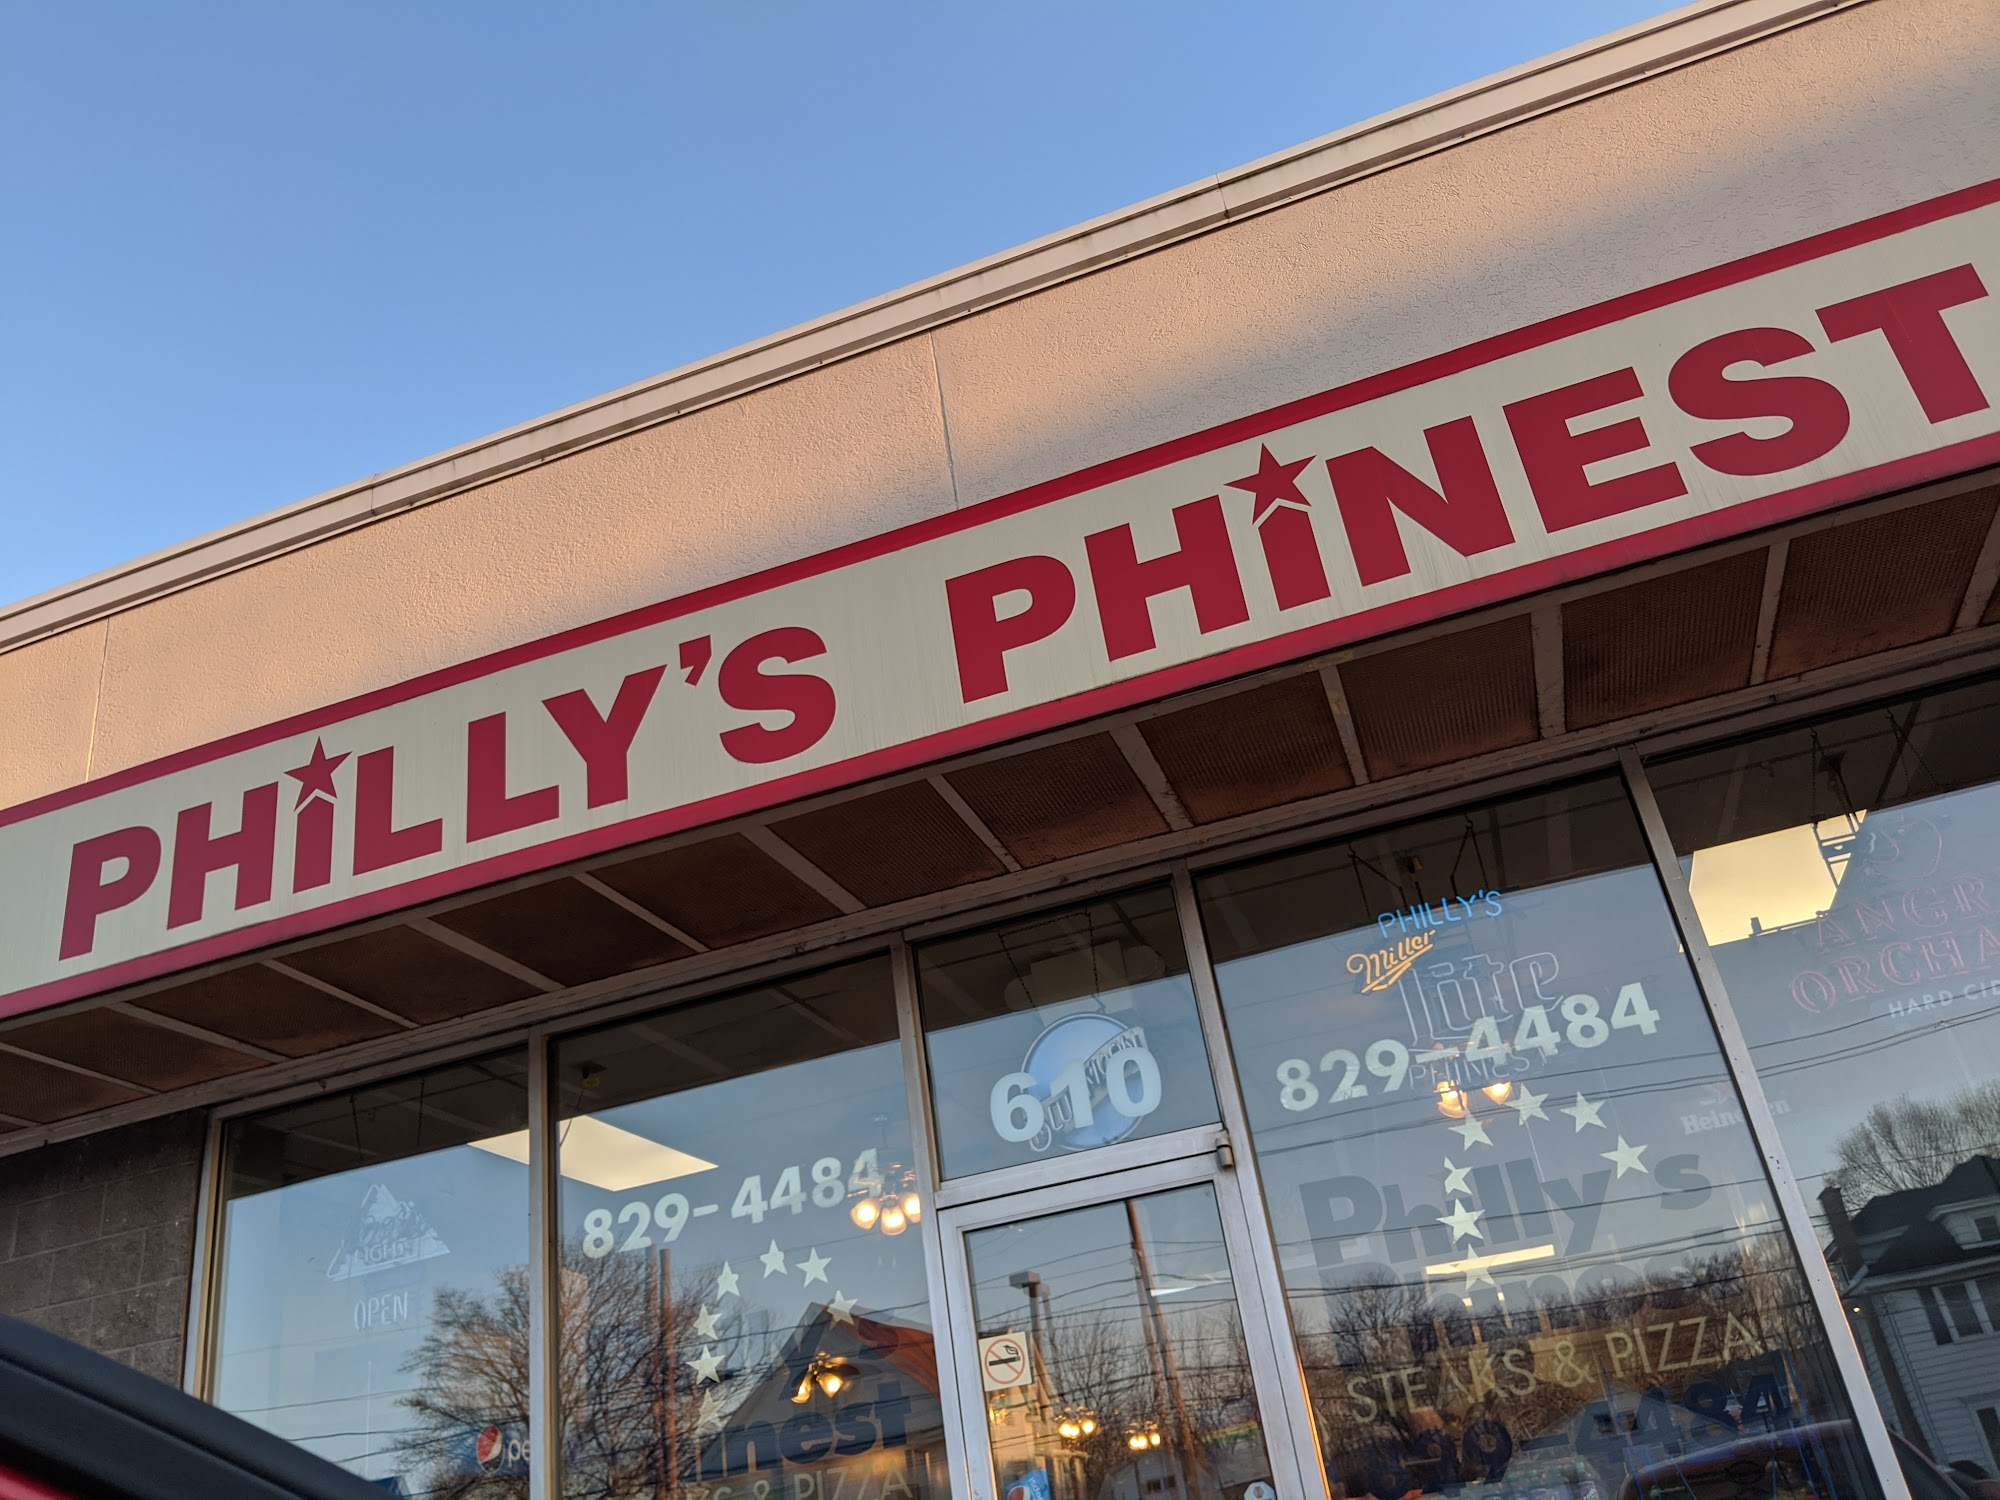 Philly's Phinest